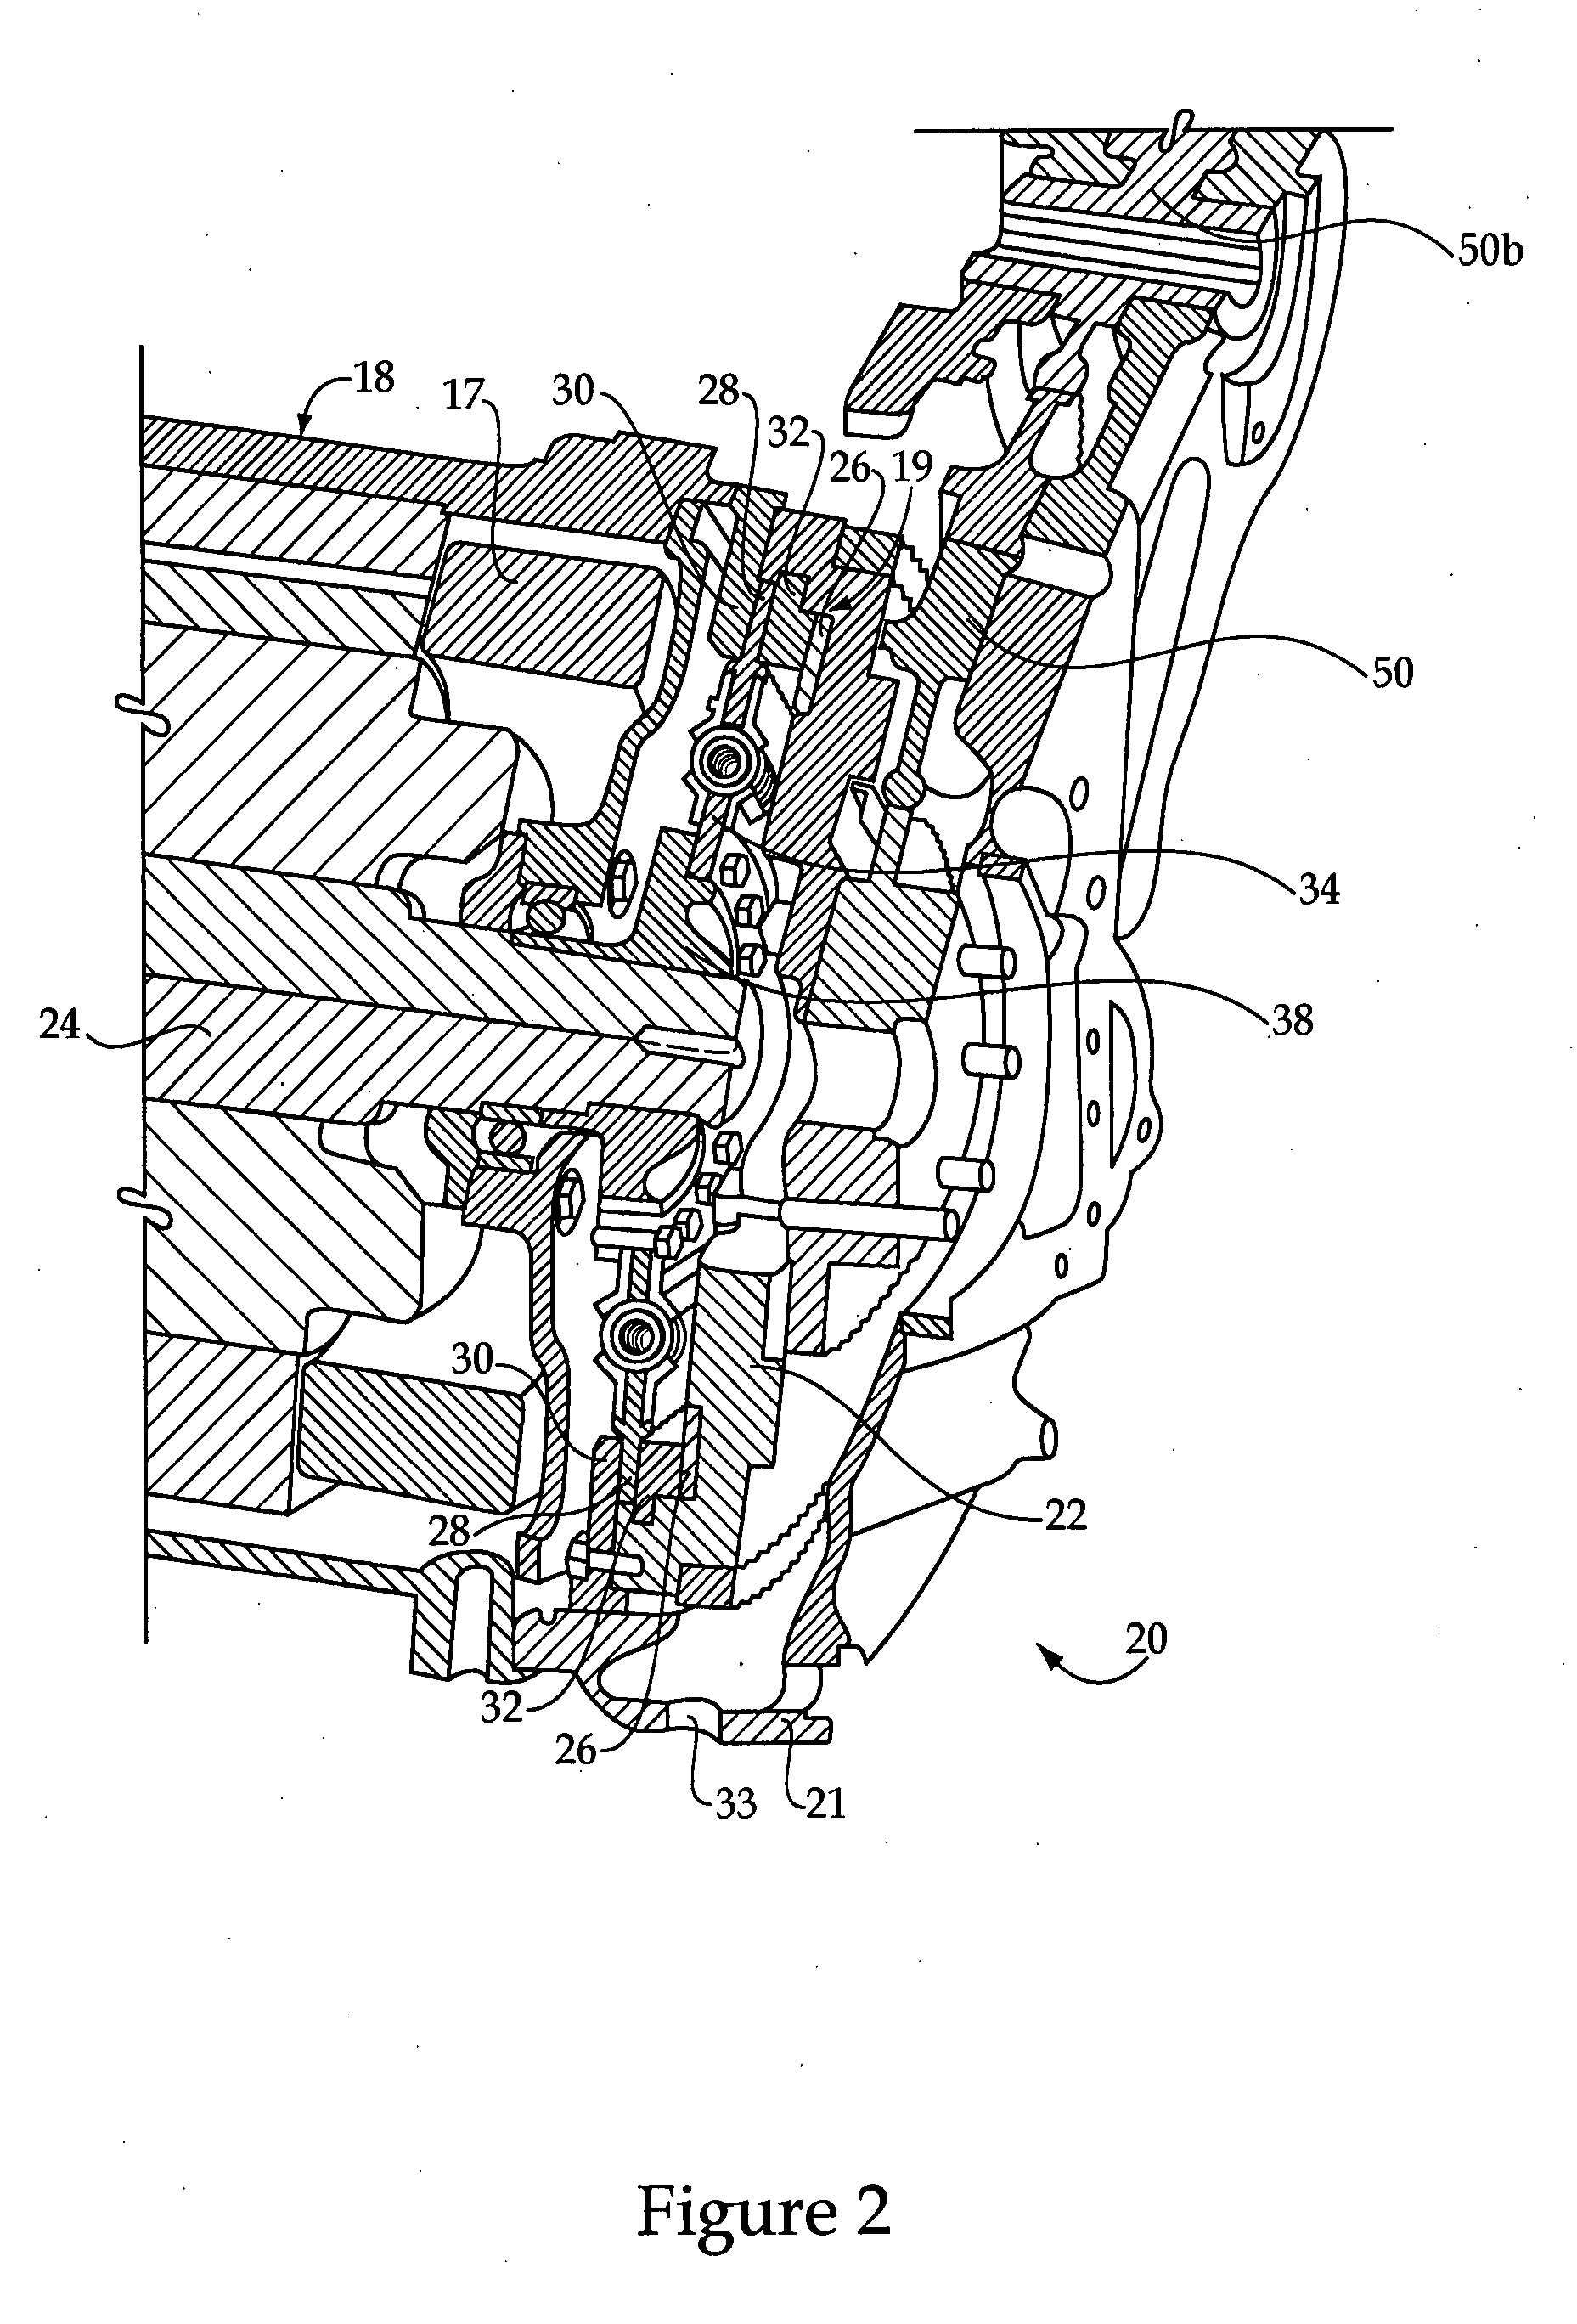 Machine having electrical power system and method